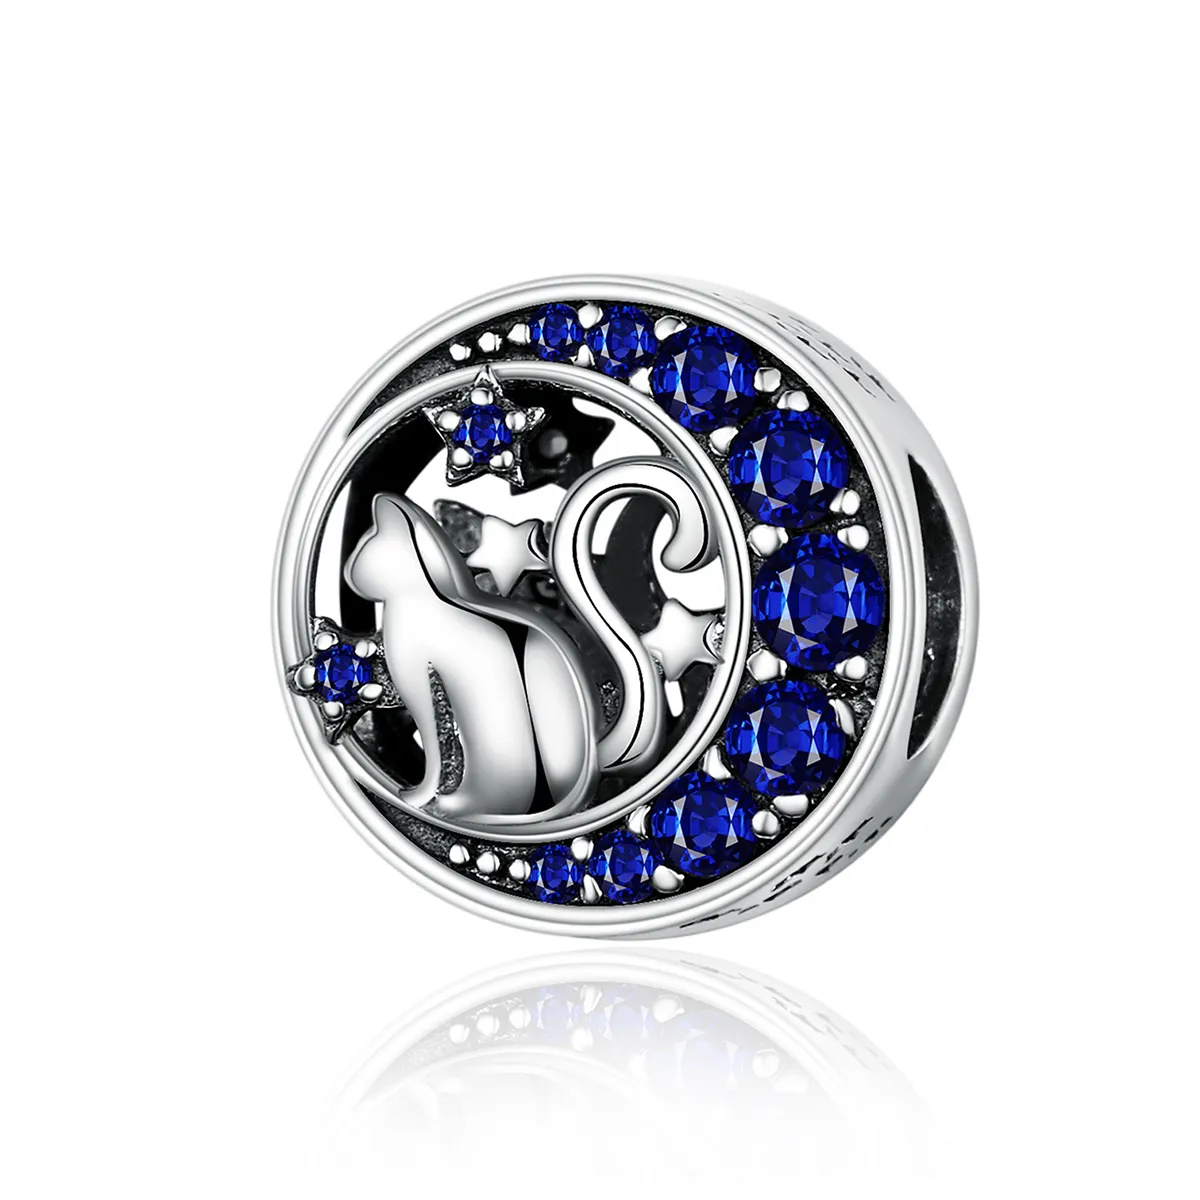 Pandora Style Silver Kitty In The Moon Charm - SCC1204